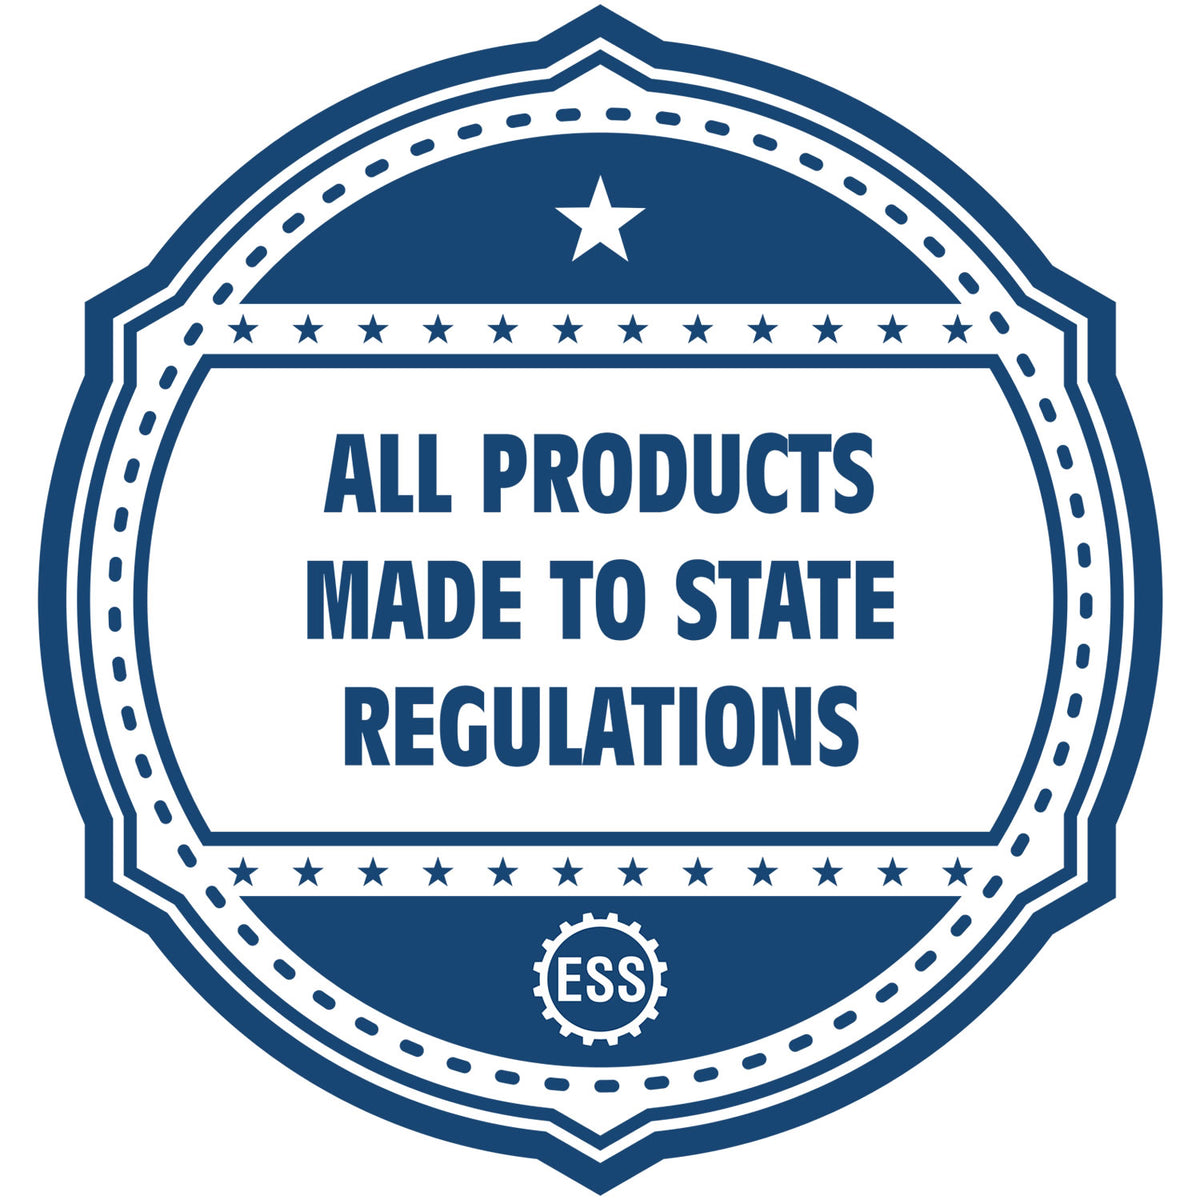 An icon or badge element for the Slim Pre-Inked Mississippi Professional Engineer Seal Stamp showing that this product is made in compliance with state regulations.